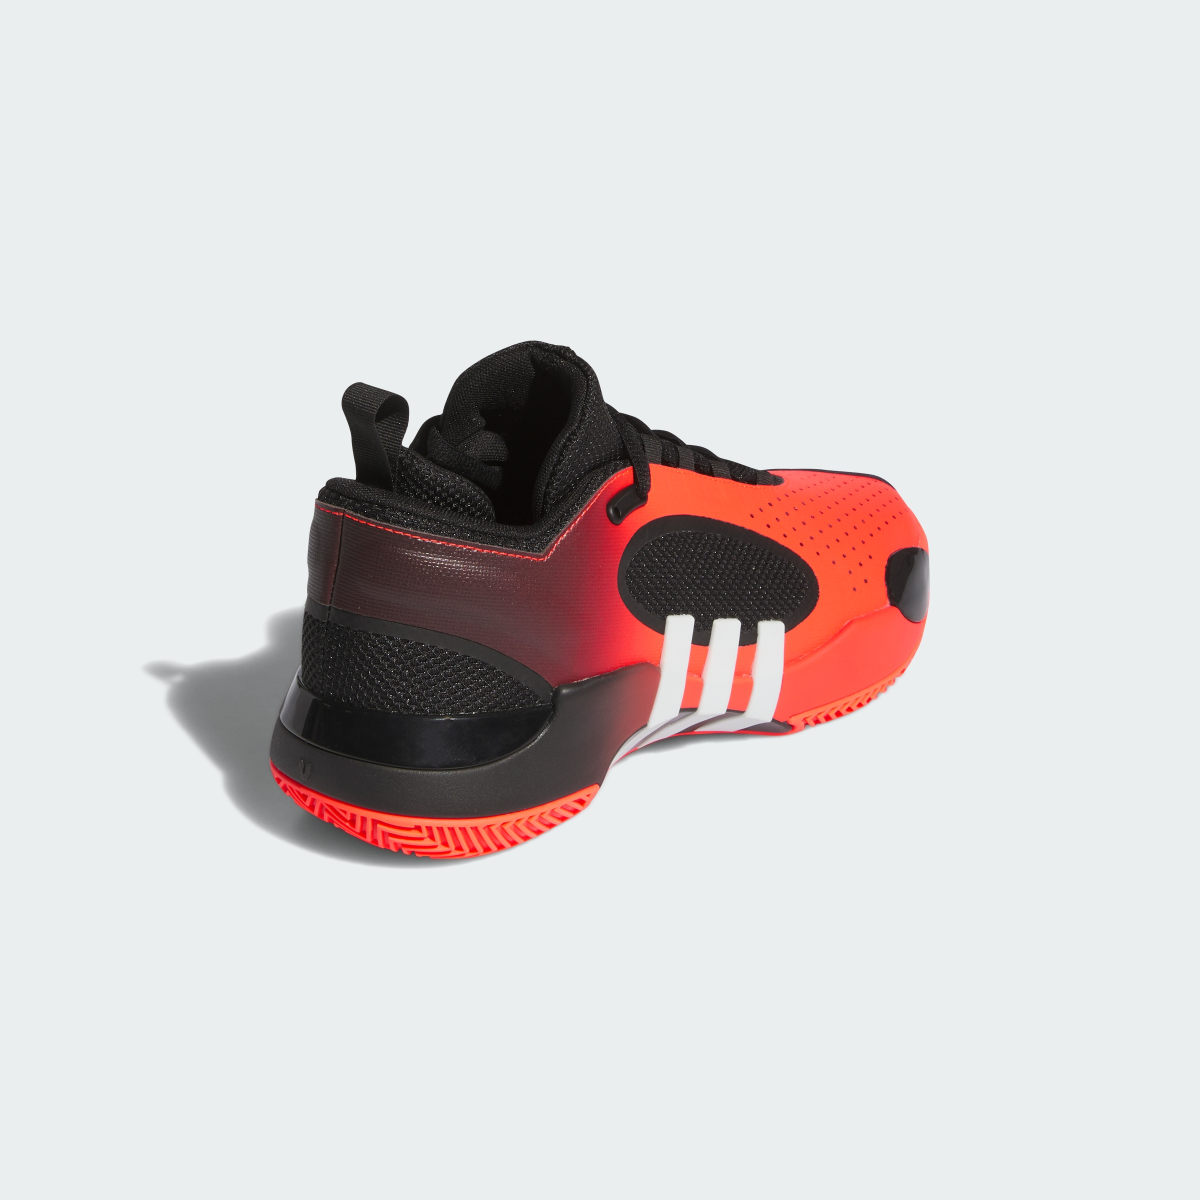 Adidas D.O.N. Issue 5 Basketball Shoes. 6